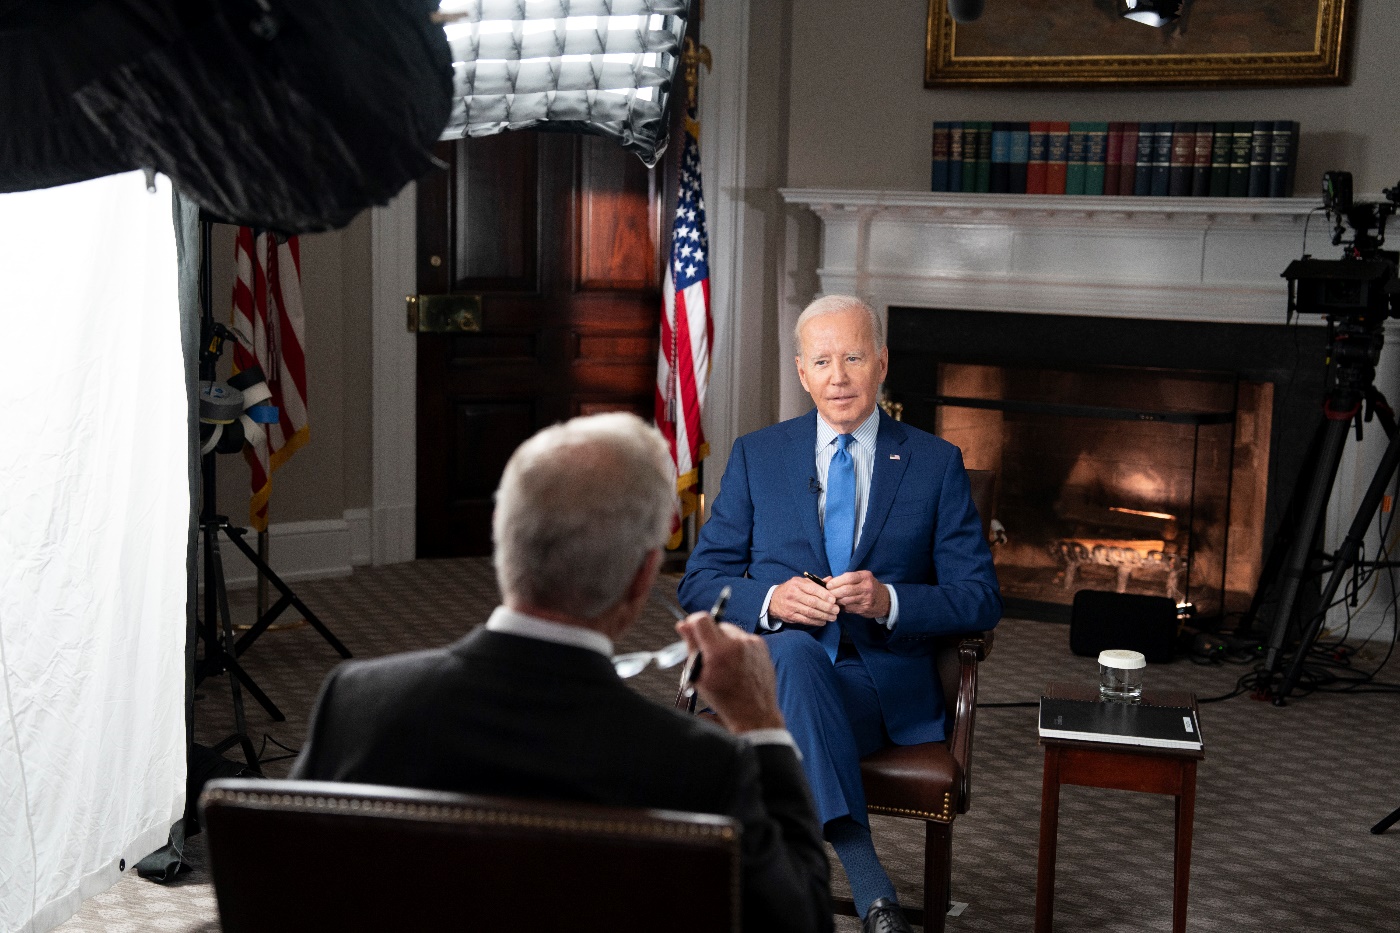 60 Minutes correspondent Scott Pelley speaks with President Joe Biden at the White House. The interview aired Sunday, Sept. 18, 2022. (Eric Kerchner—60 MINUTES/CBS)